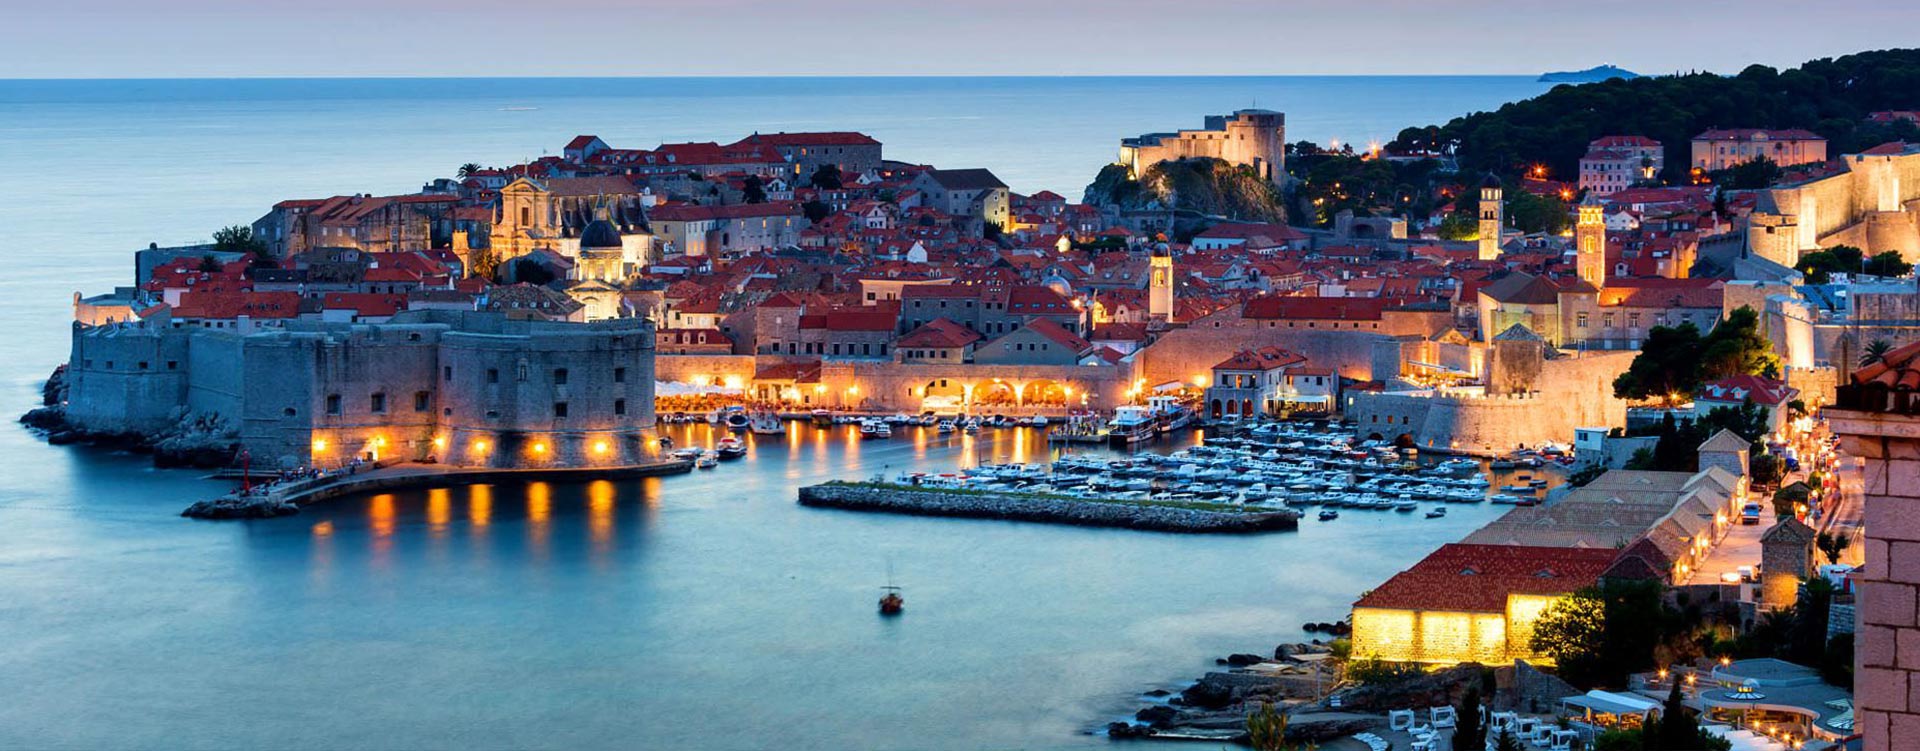 Snatch up deals on business class flights to Dubrovnik so you can relax on Lokrum Island. - IFlyFirstClass